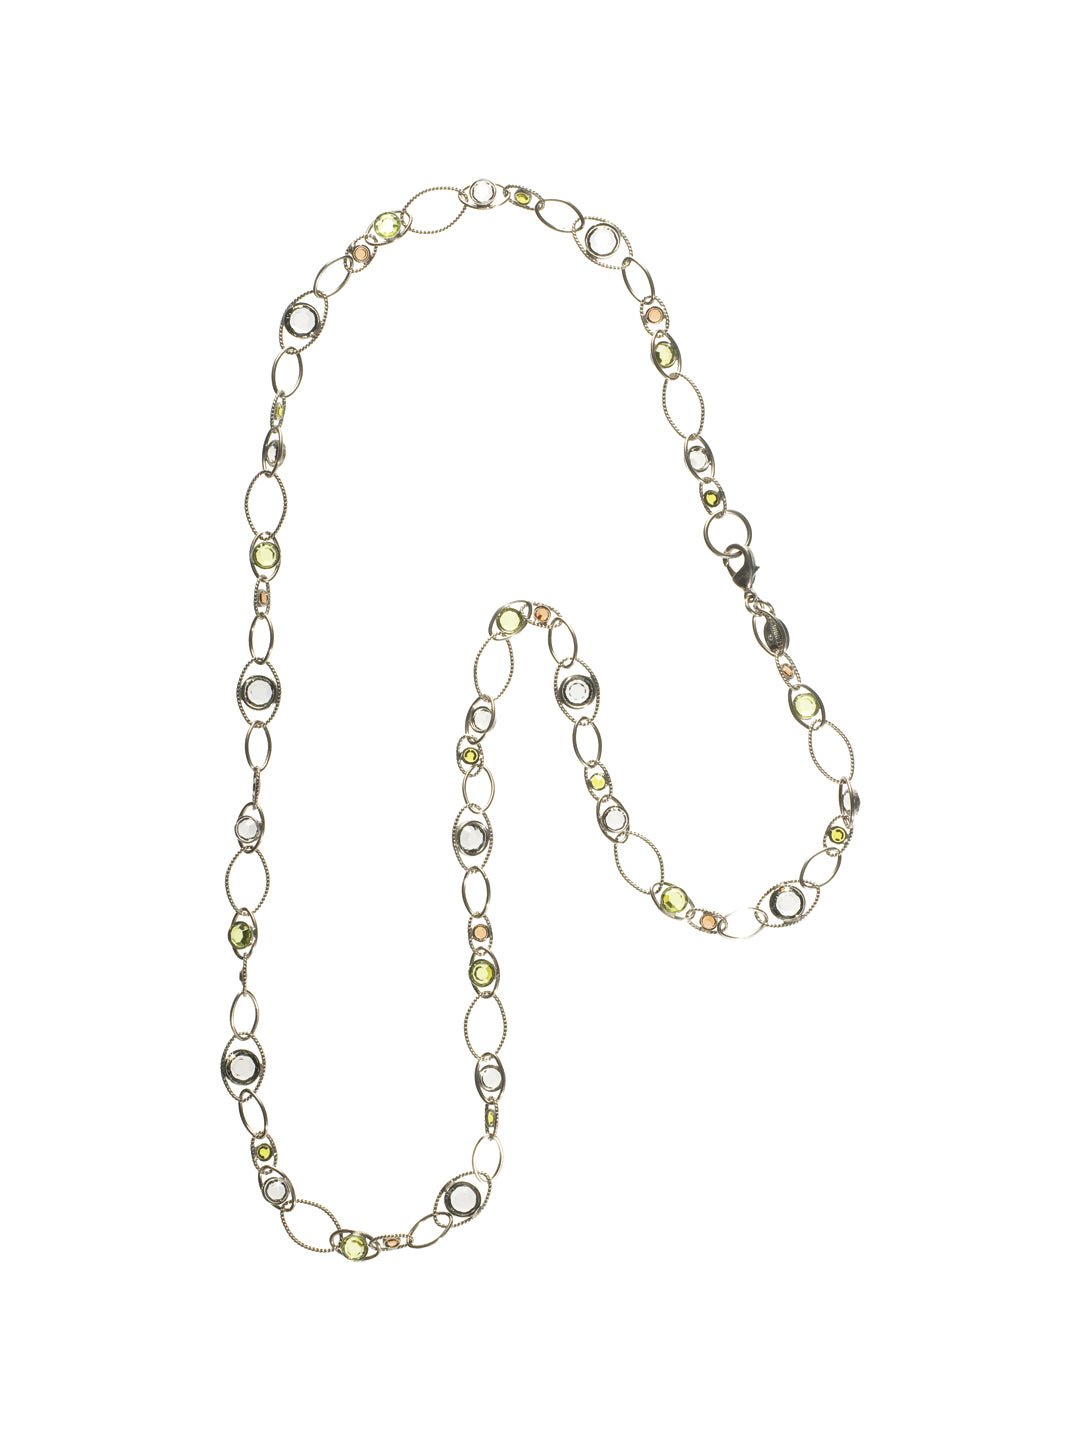 Crystal and Chain Linked Long Strand Necklace Long Necklace - NCG4ASCJ - Layered or stand alone this crystal channel necklace is perfect for everyday wear. From Sorrelli's Concrete Jungle collection in our Antique Silver-tone finish.